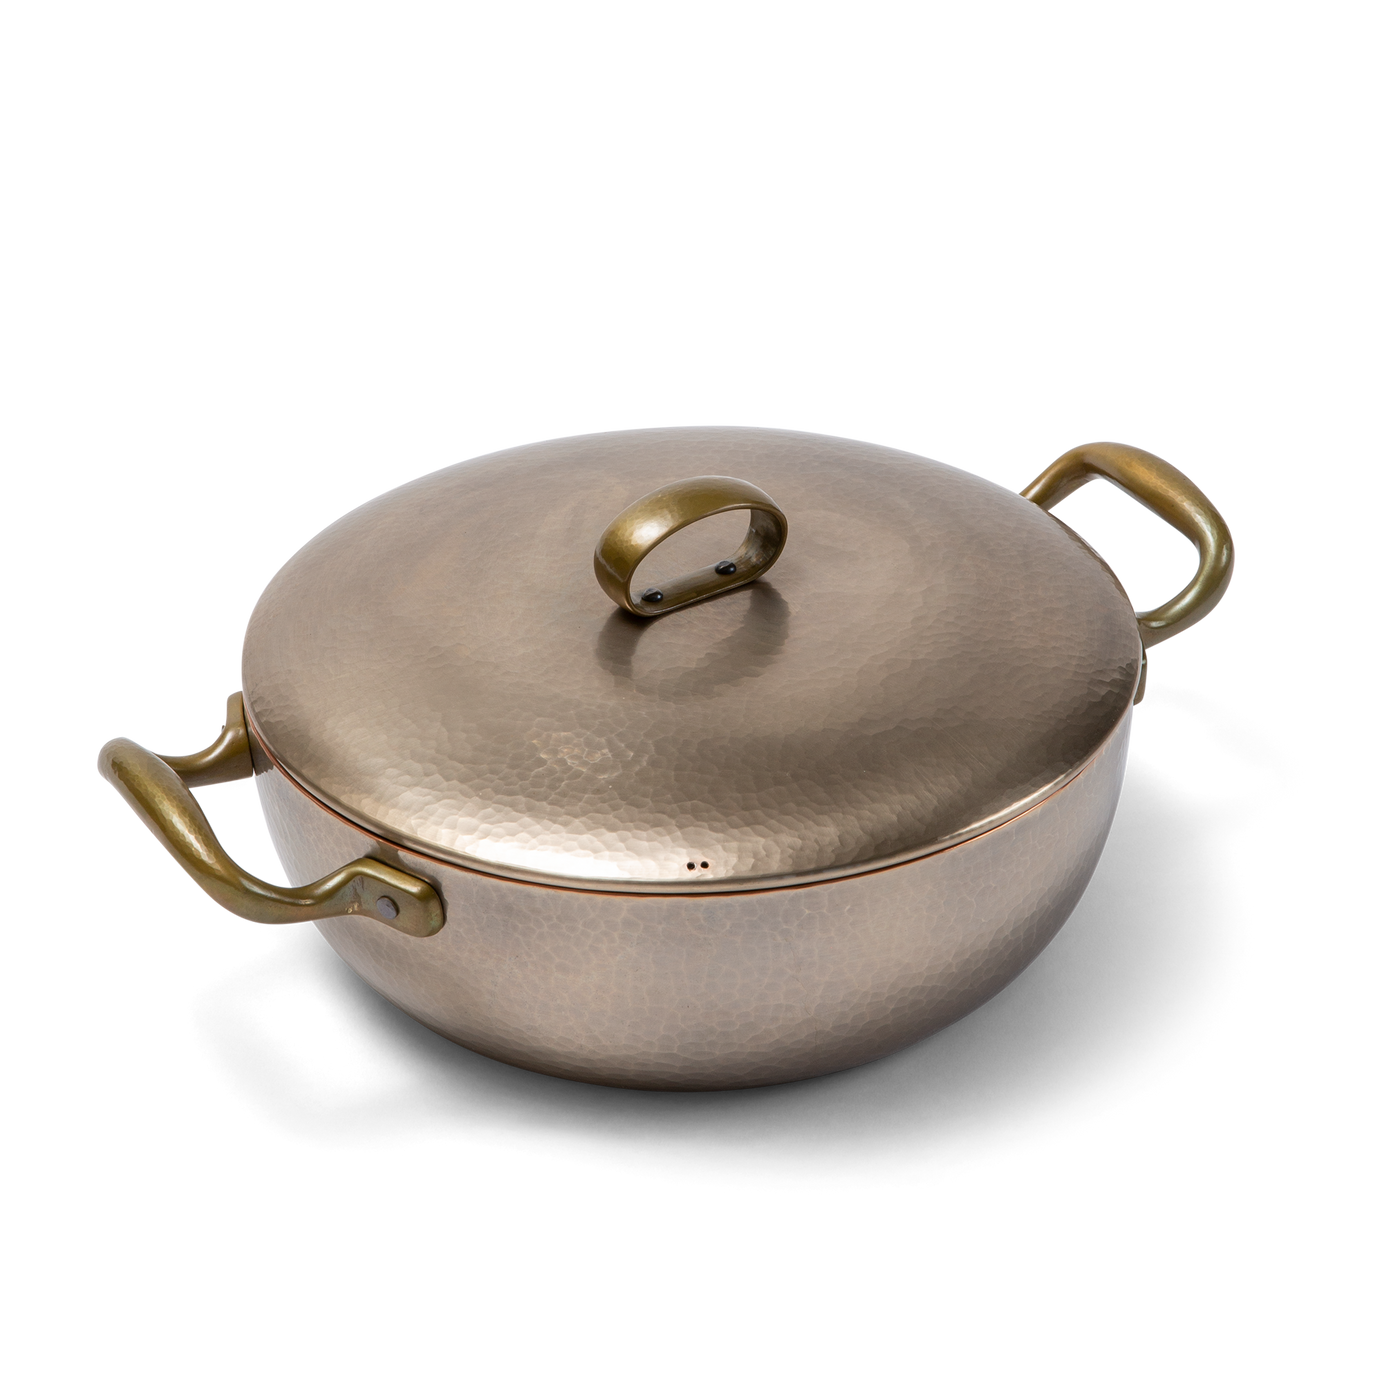 Two-handed pot with lid - 3.5 quarts